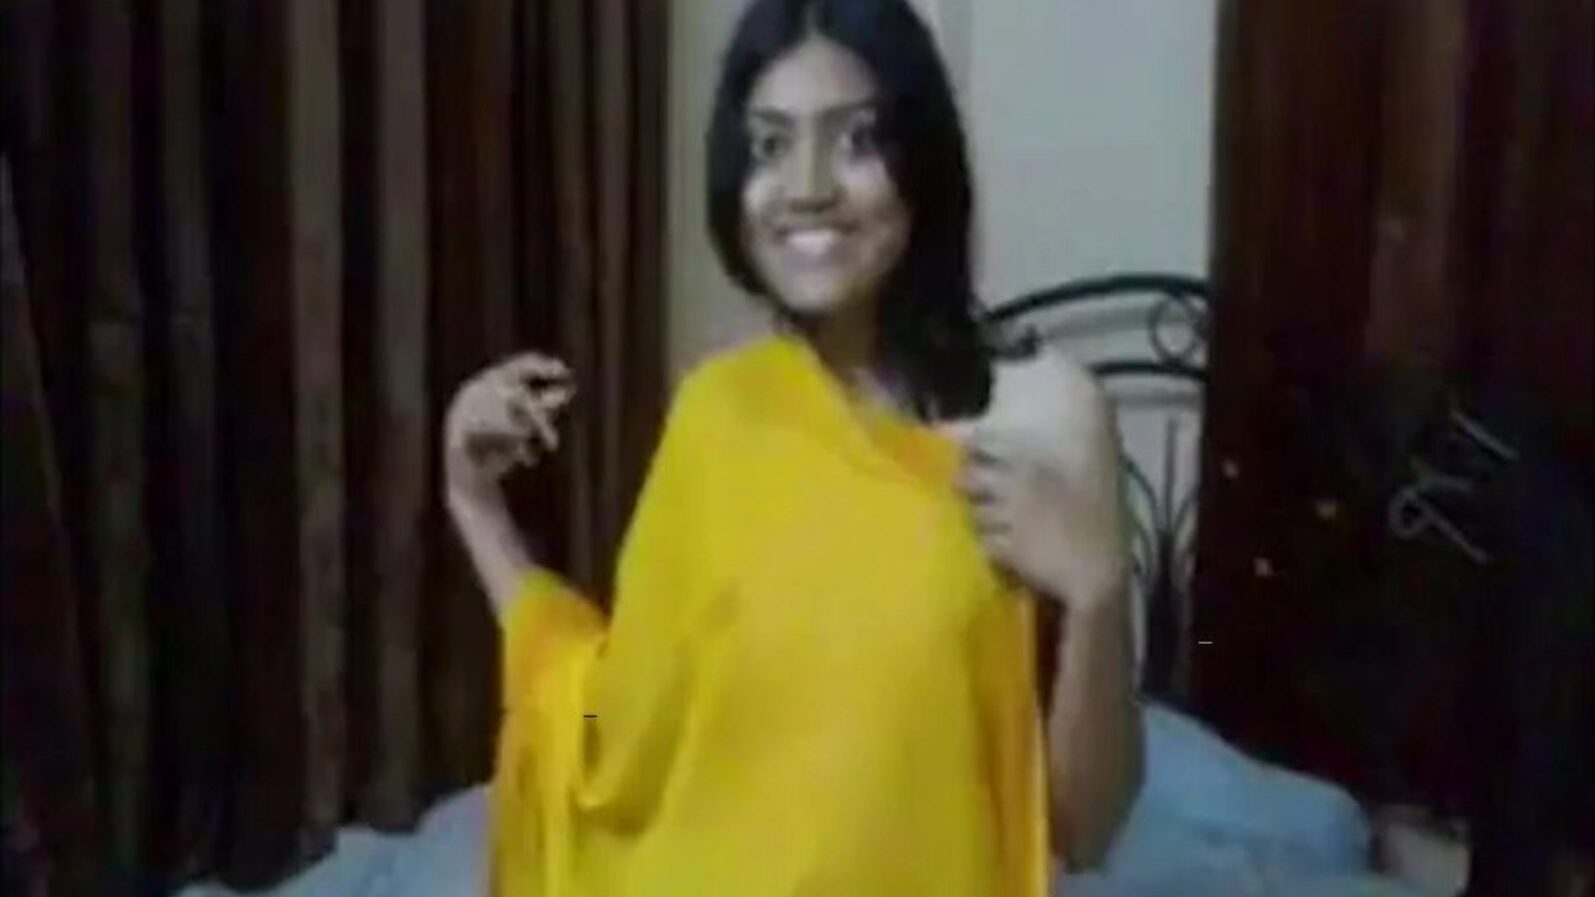 indian college girl fuck by stepbrother, porn 0c: xhamster watch indian college girl fuck by stepbrother movie on xhamster, the giant hd orgy tube site with lots of free asian fuck online & blowjob porno episodes